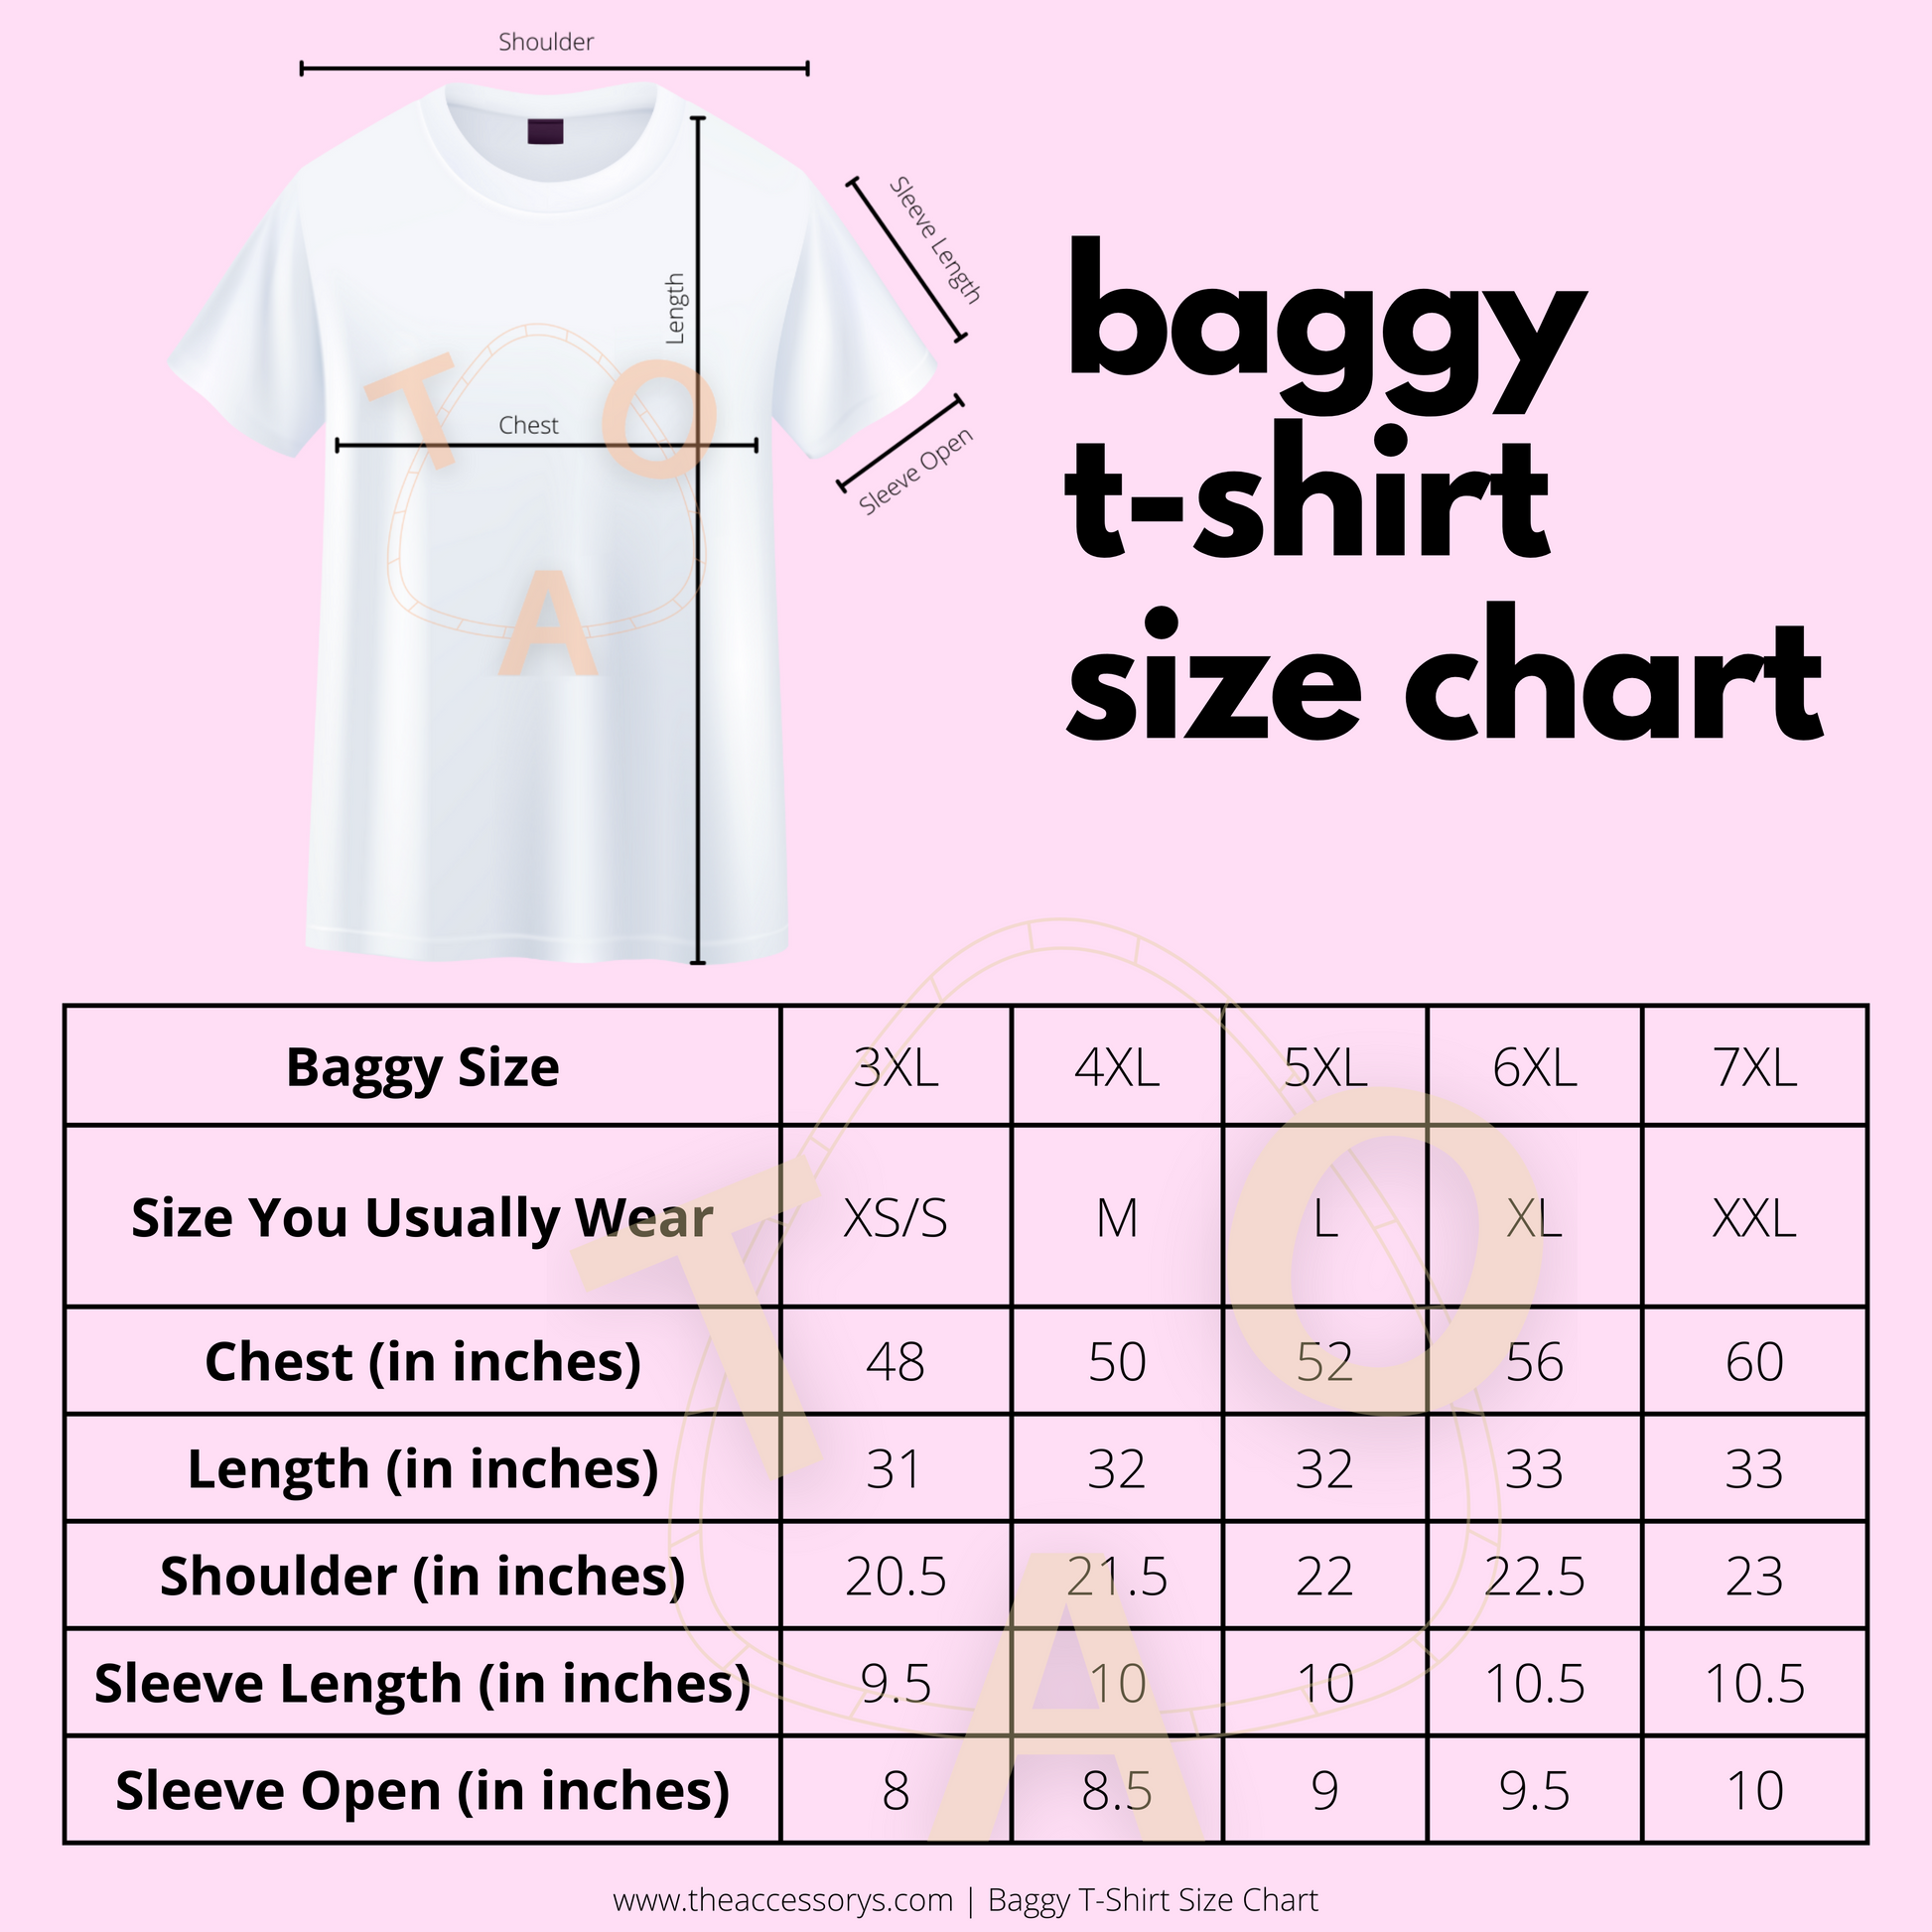 Baggy T-Shirt Size Chart - The Accessorys Official